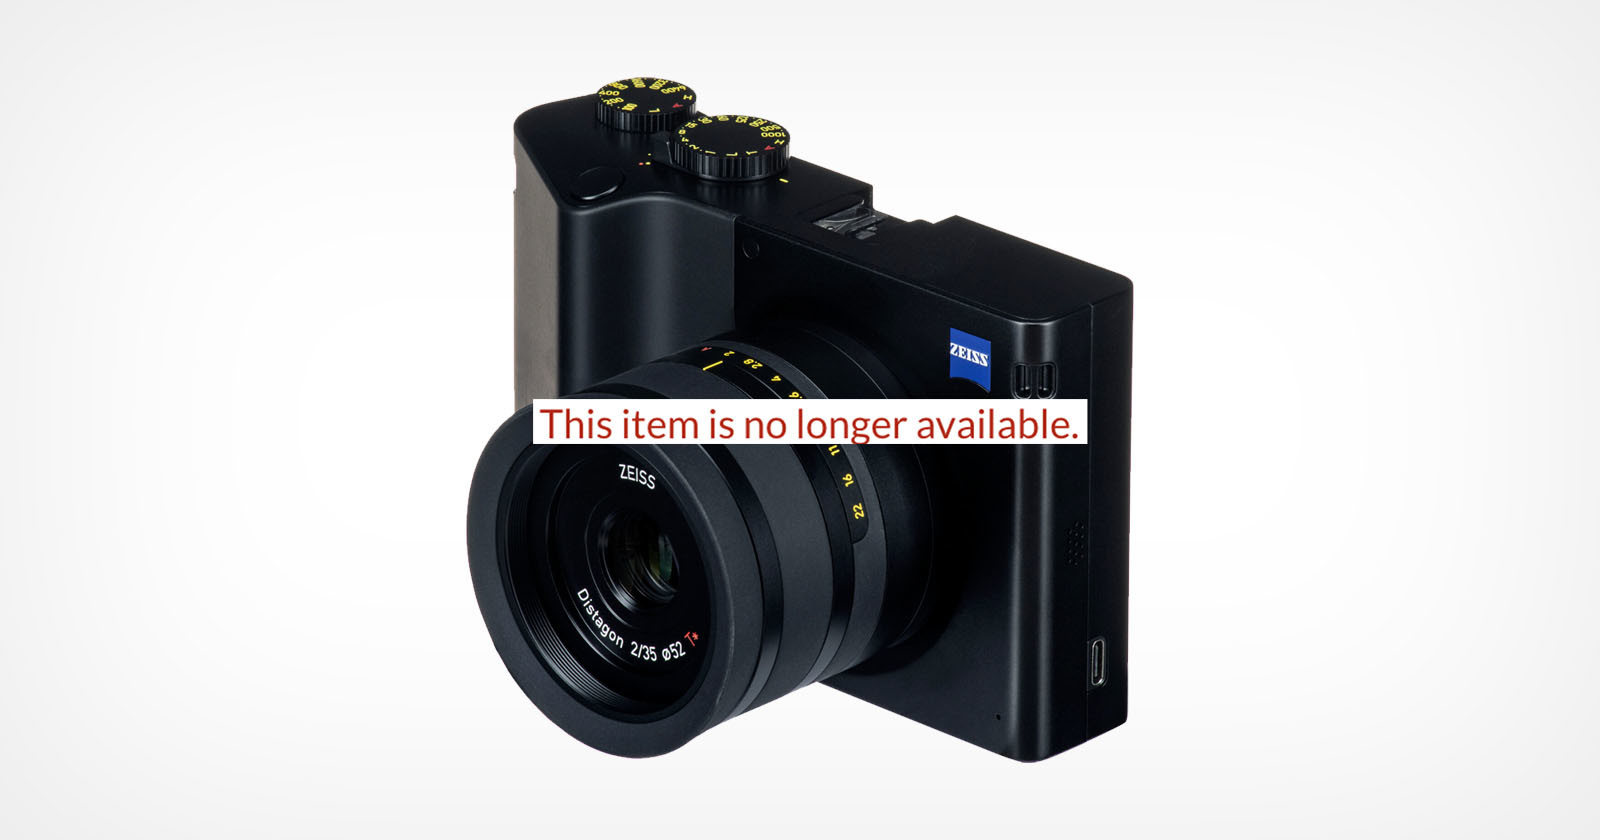  android-powered zeiss zx1 camera has been discontinued 